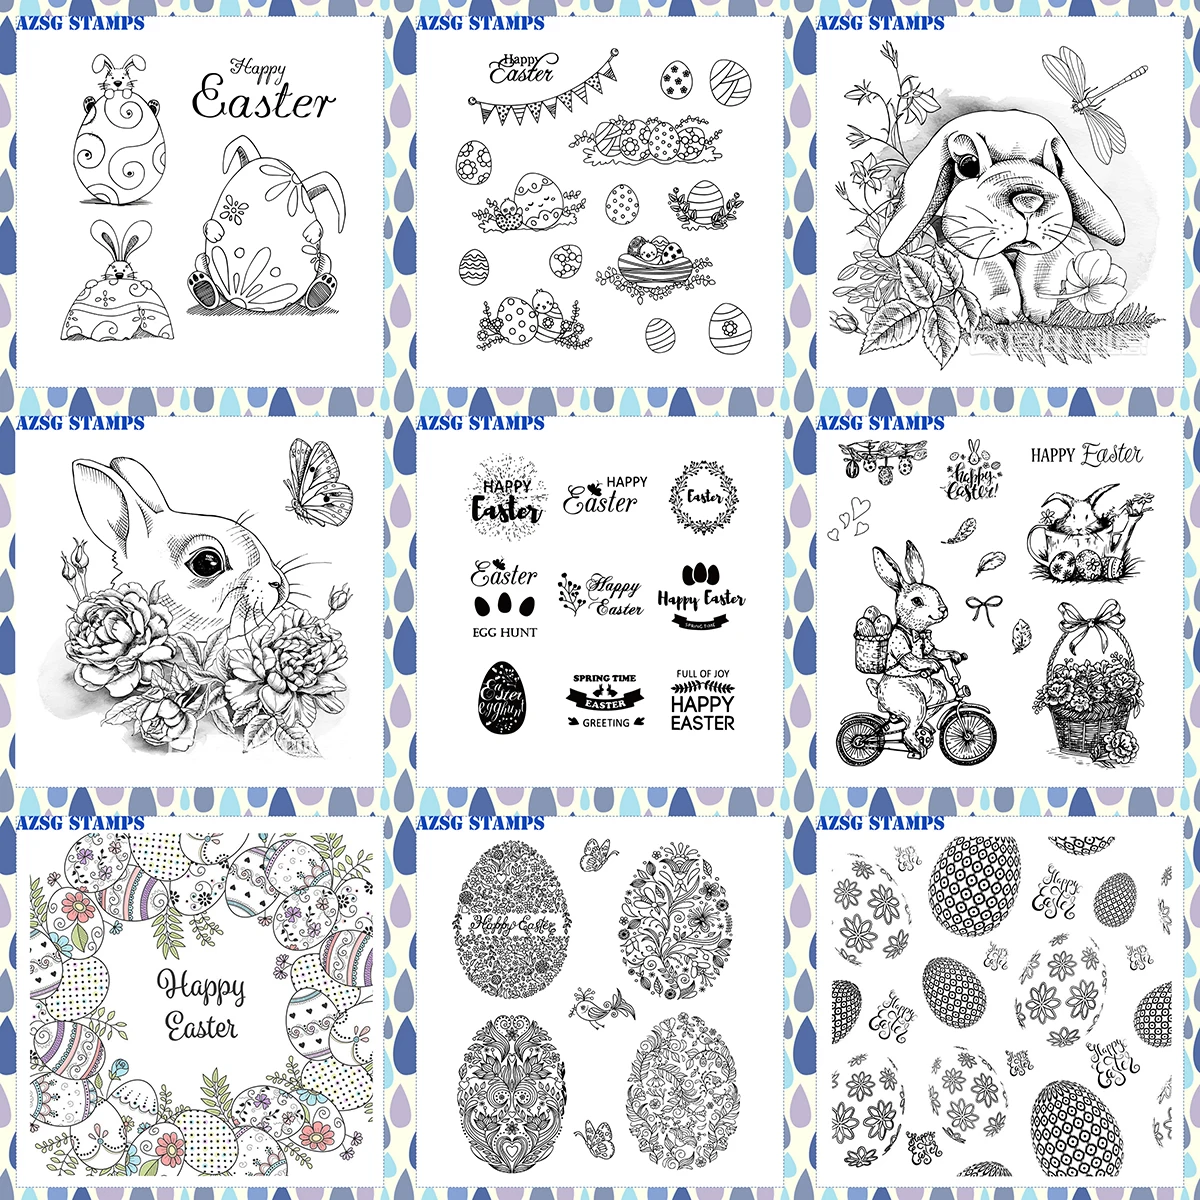 Cute Bunny and Easter Eggs Clear Stamps For DIY Scrapbooking/Card Making/Album Decorative Silicone Seals Crafts